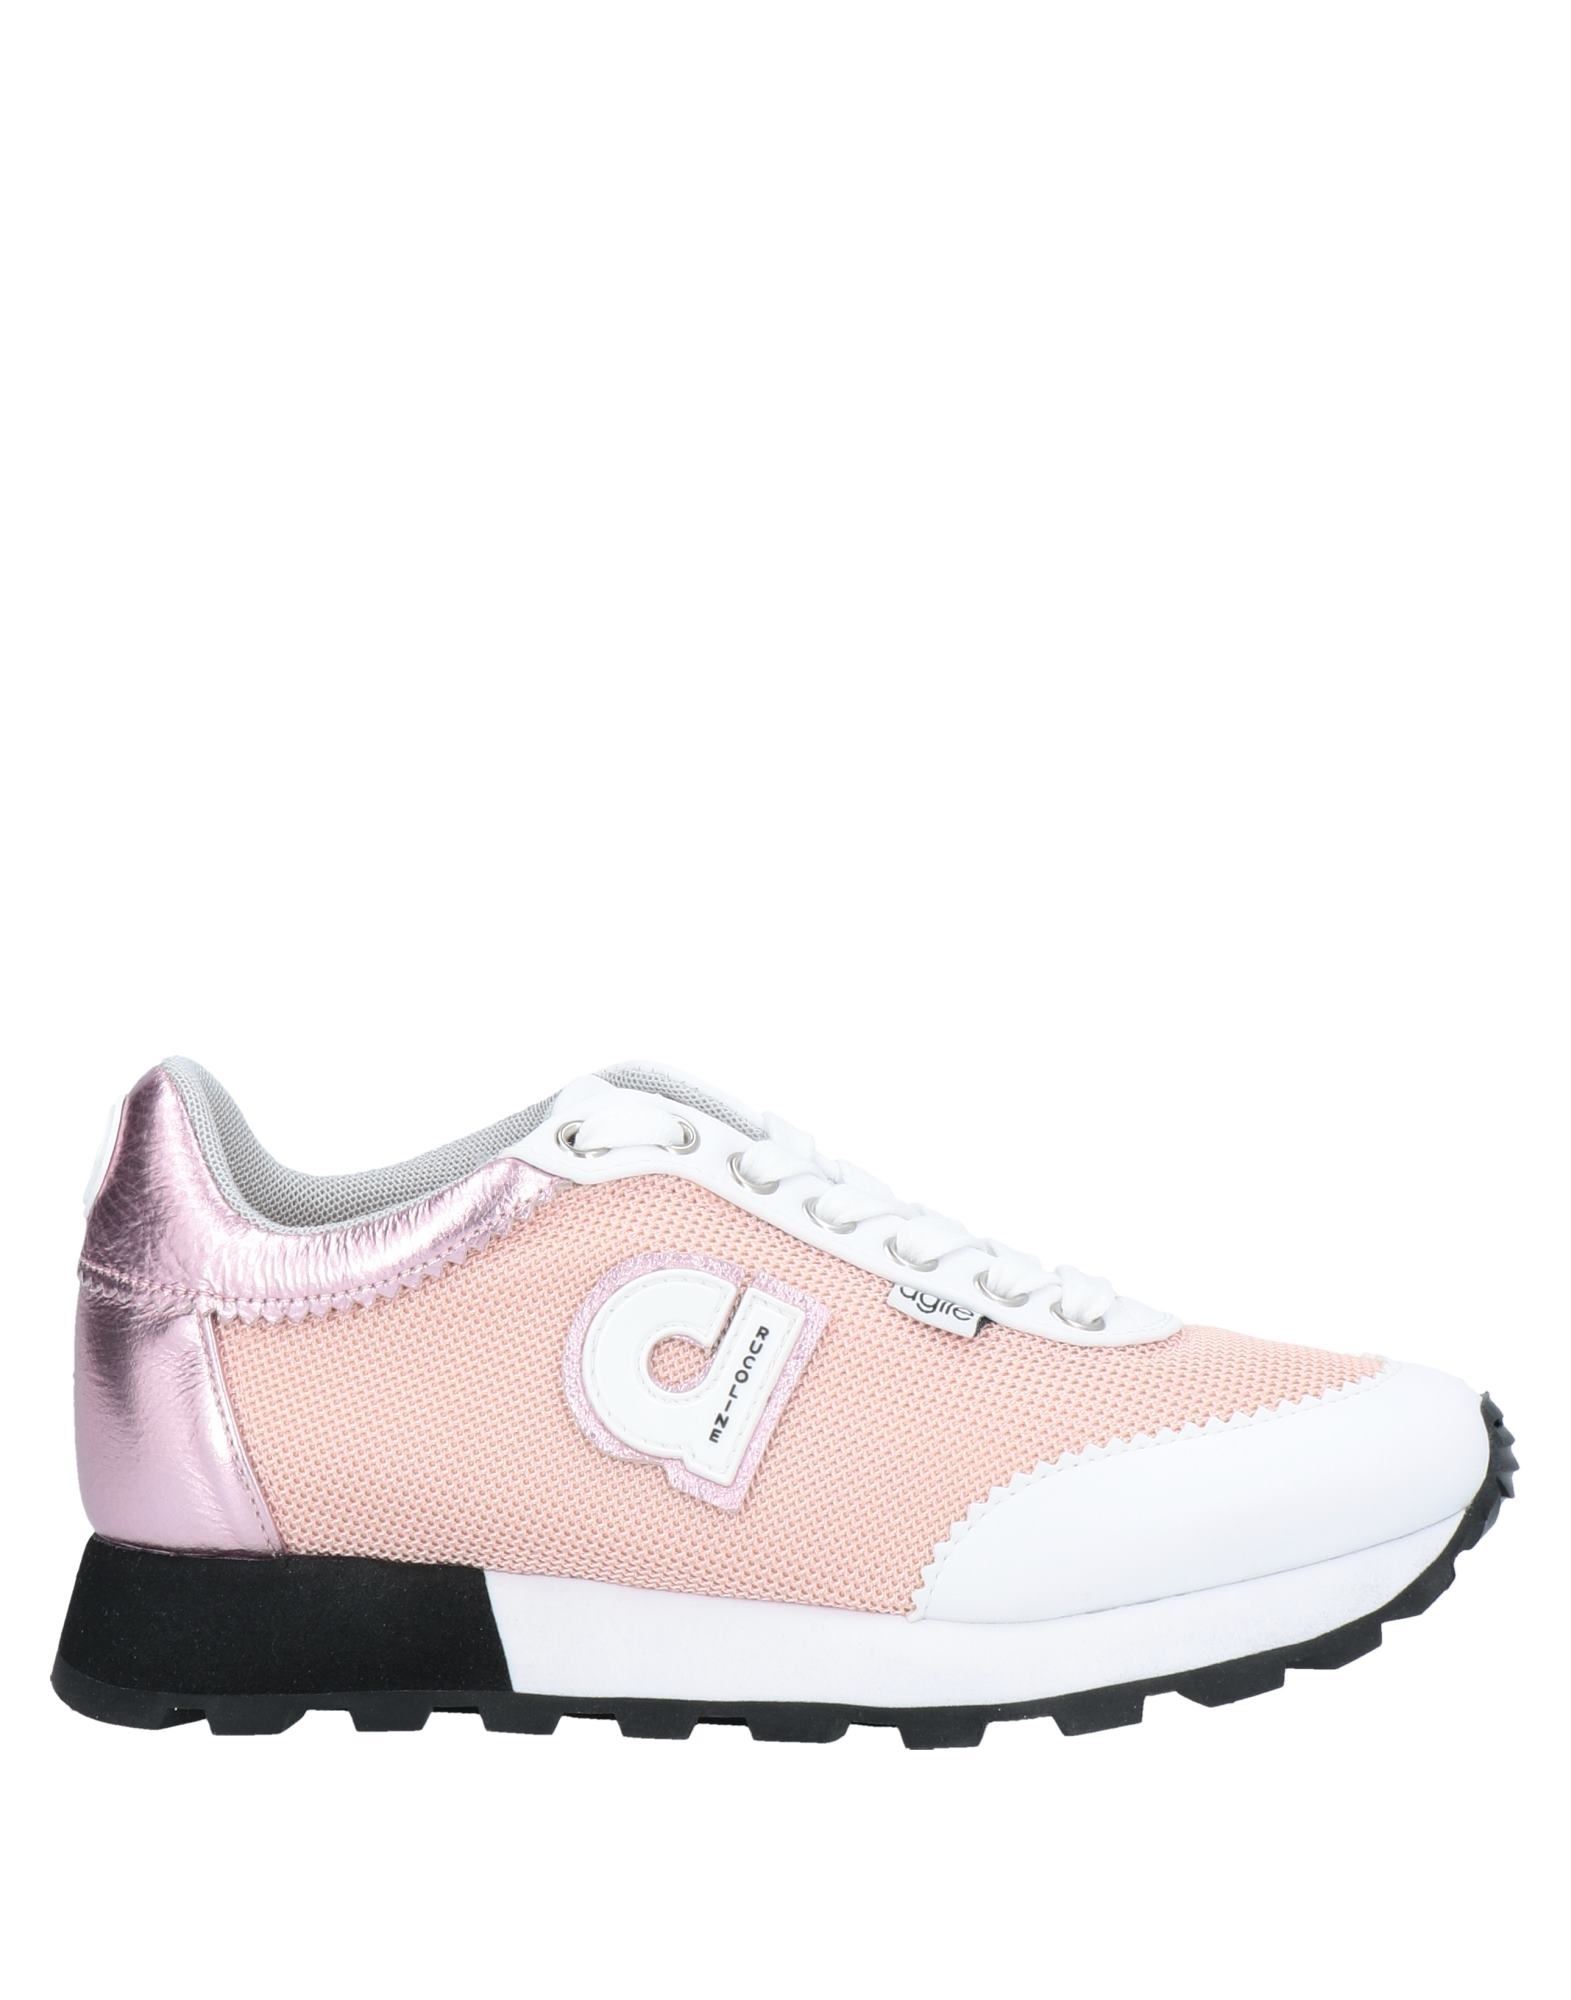 Agile By Rucoline Sneakers In Salmon Pink